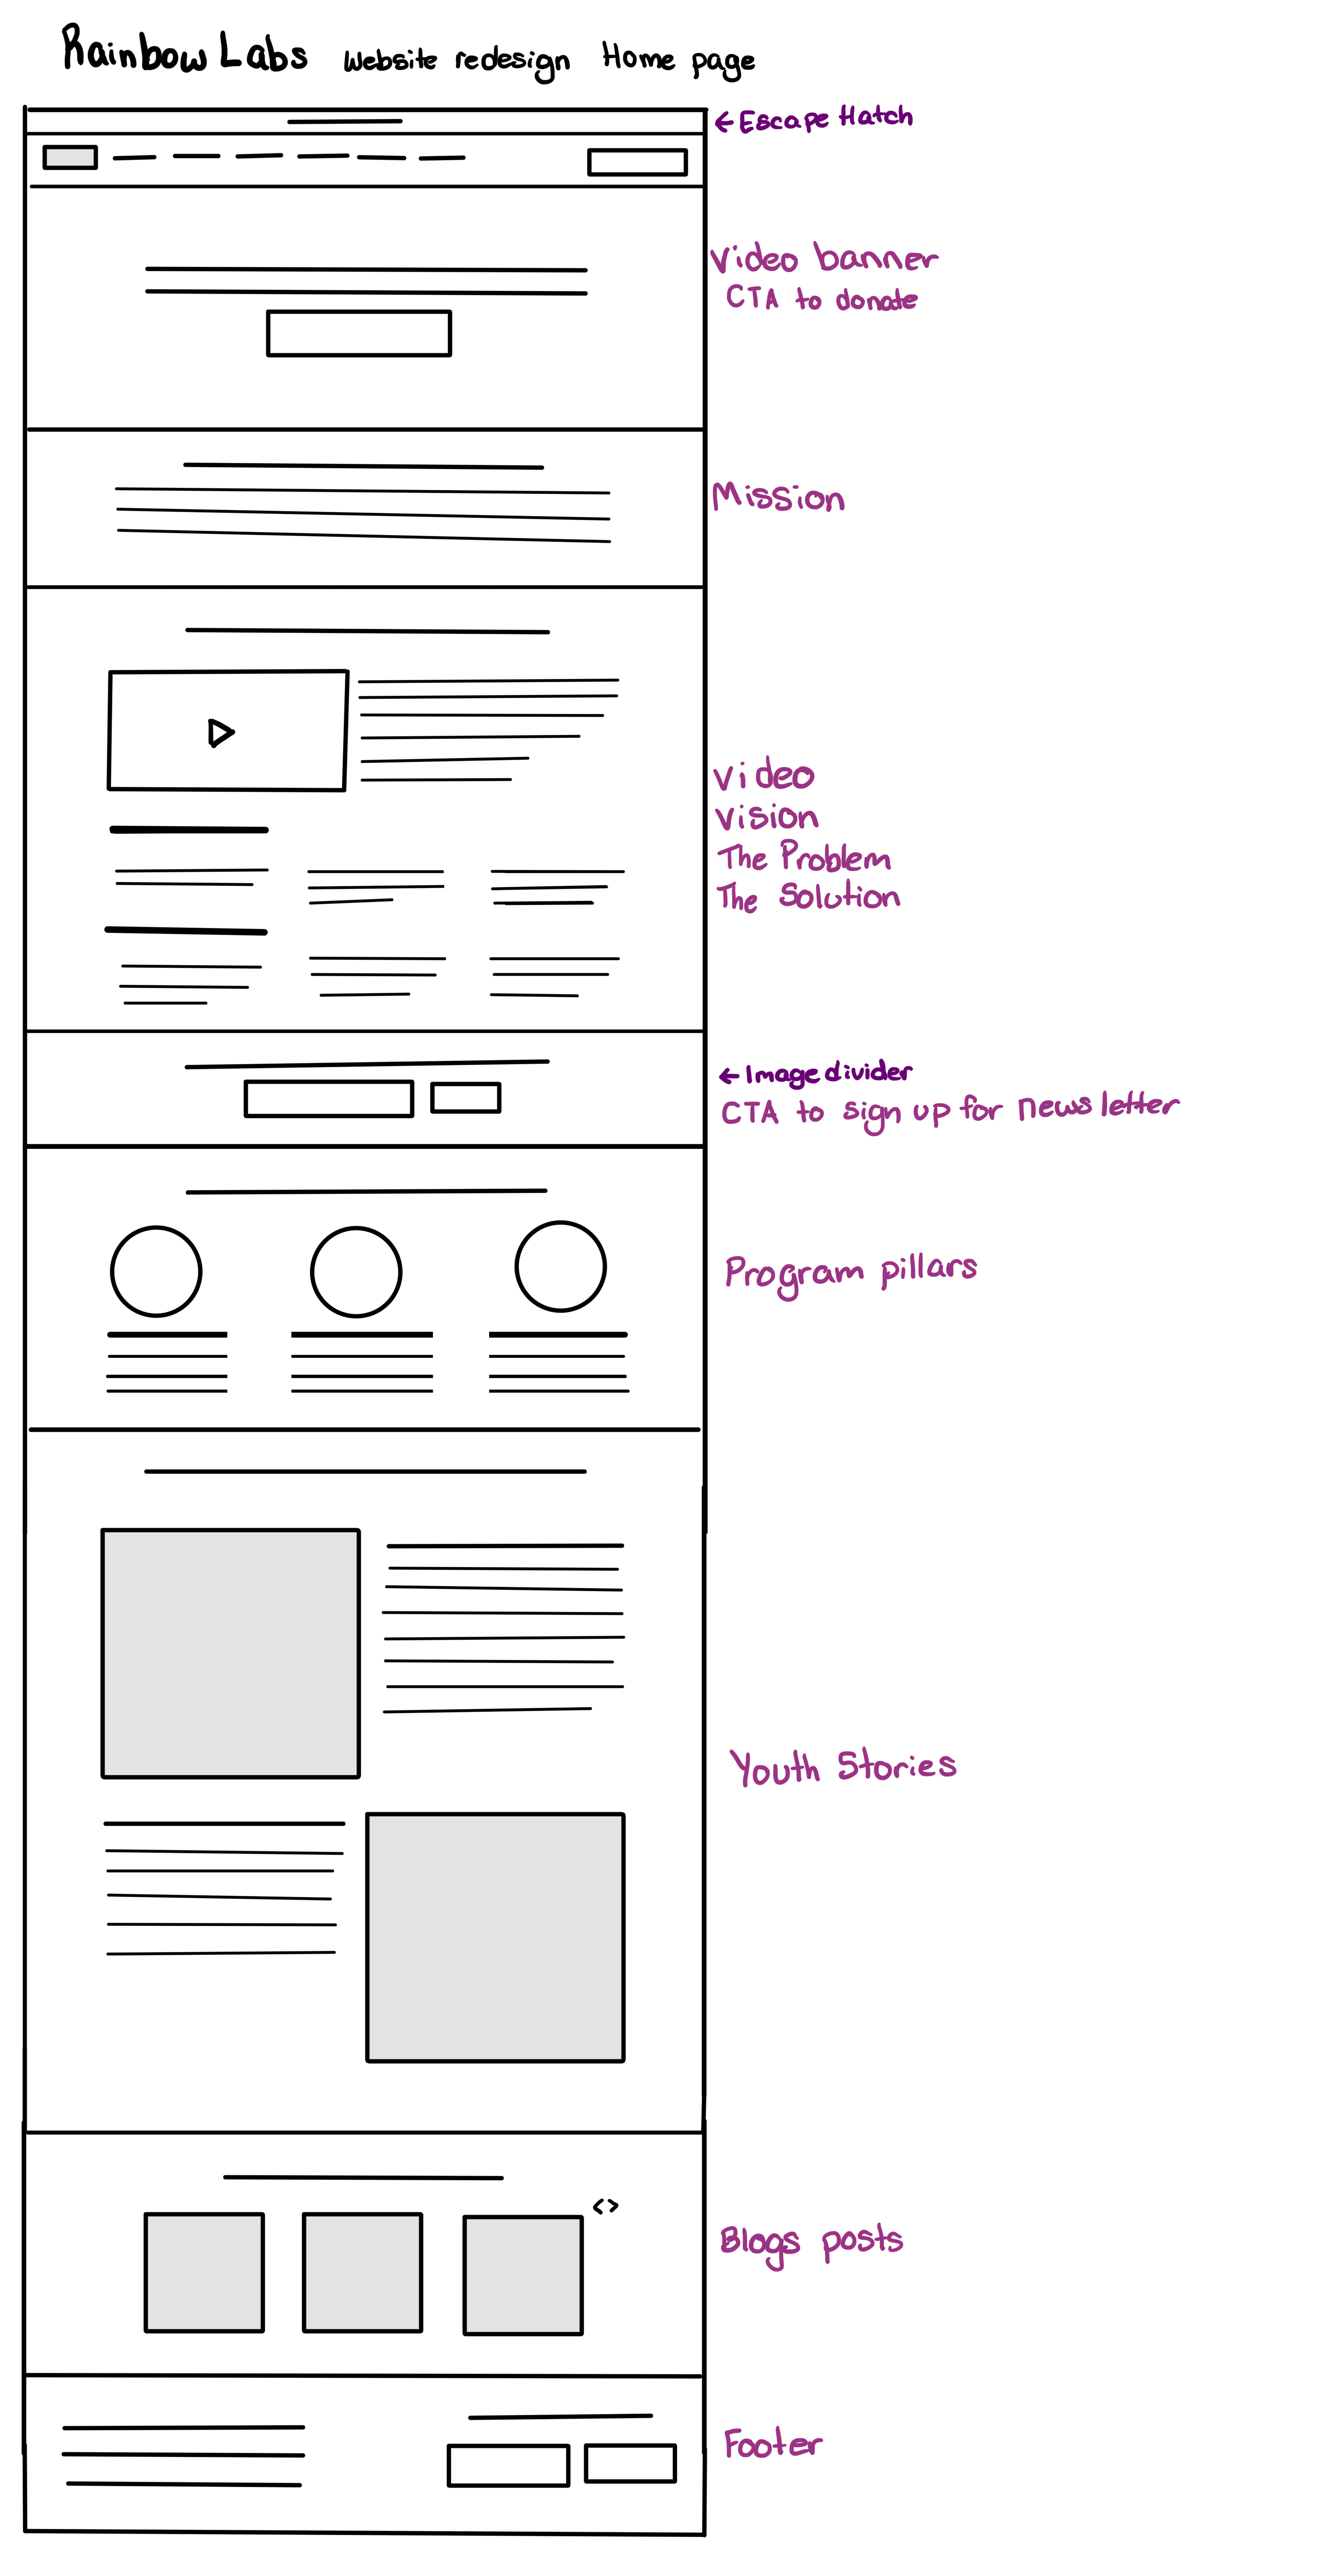 Image of a wireframe of the Rainbow Labs wireframe